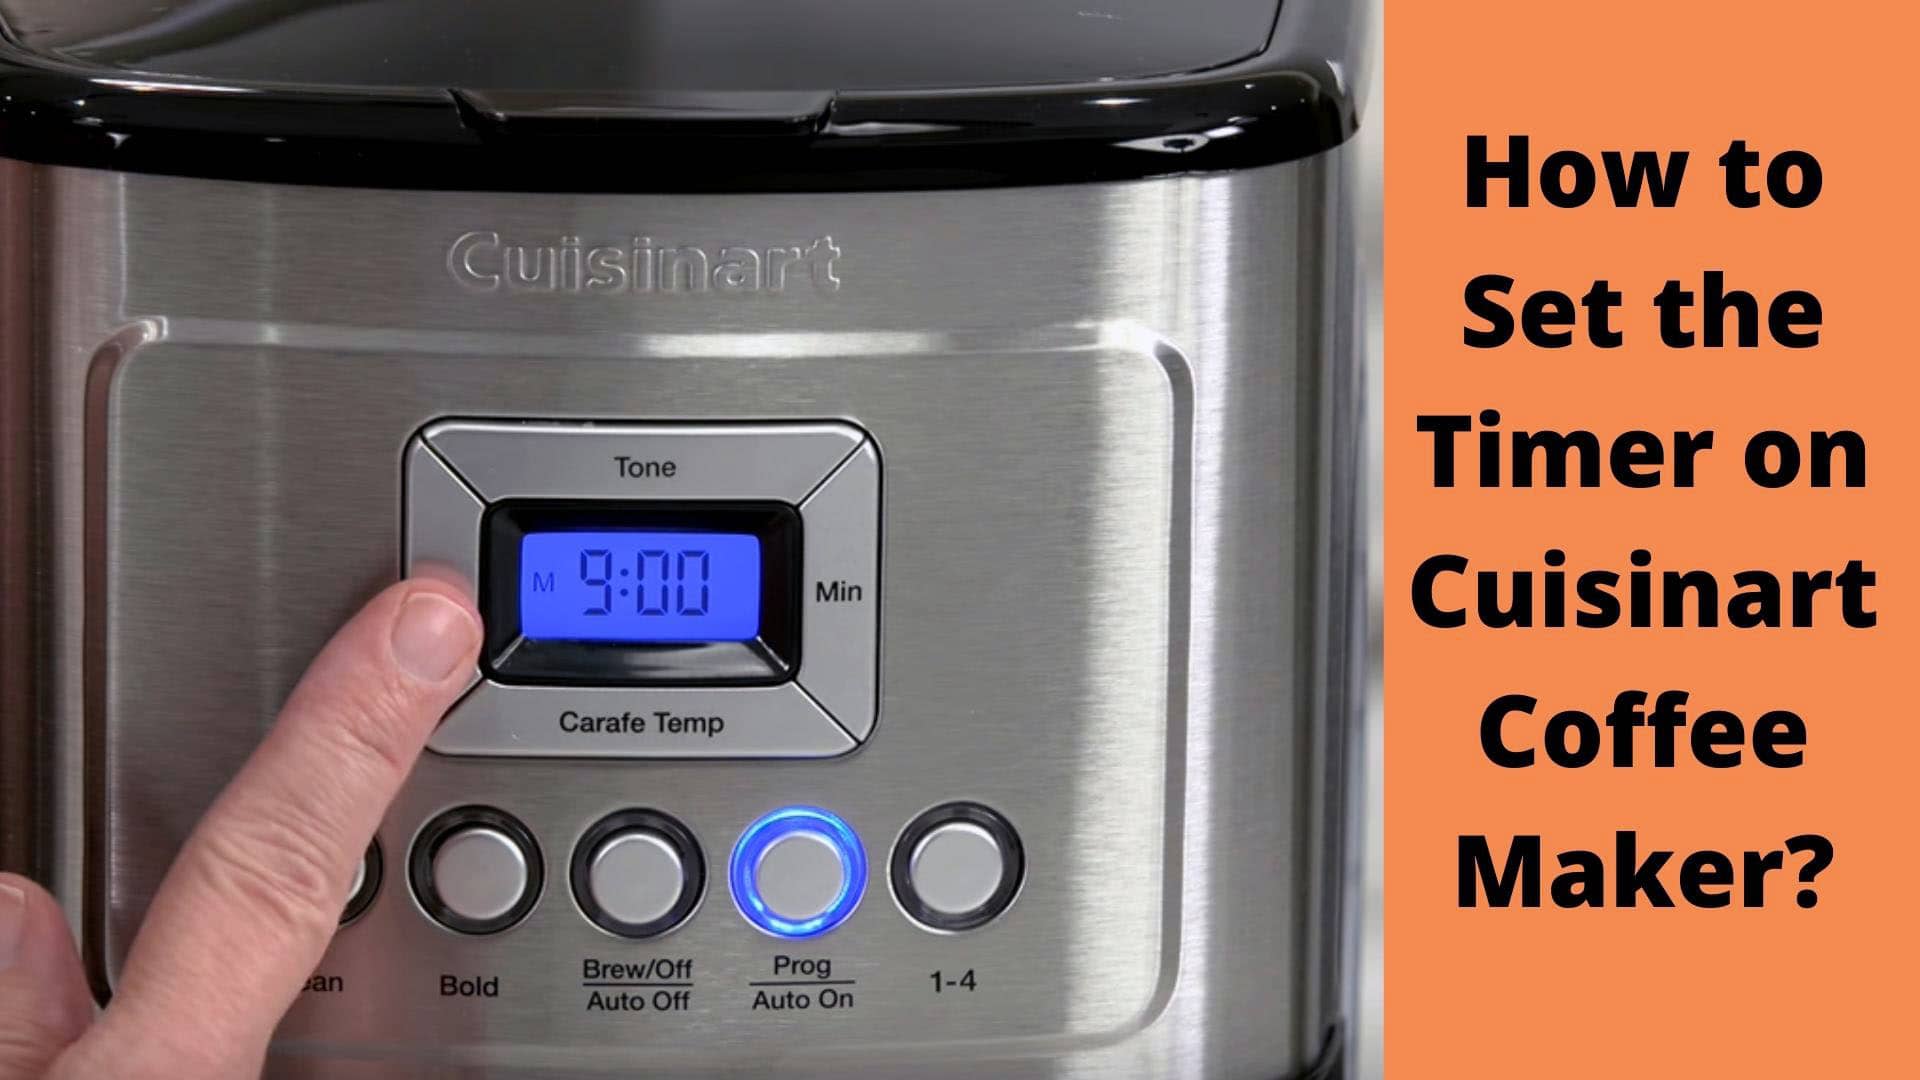 How to Set the Timer on Cuisinart Coffee Maker?